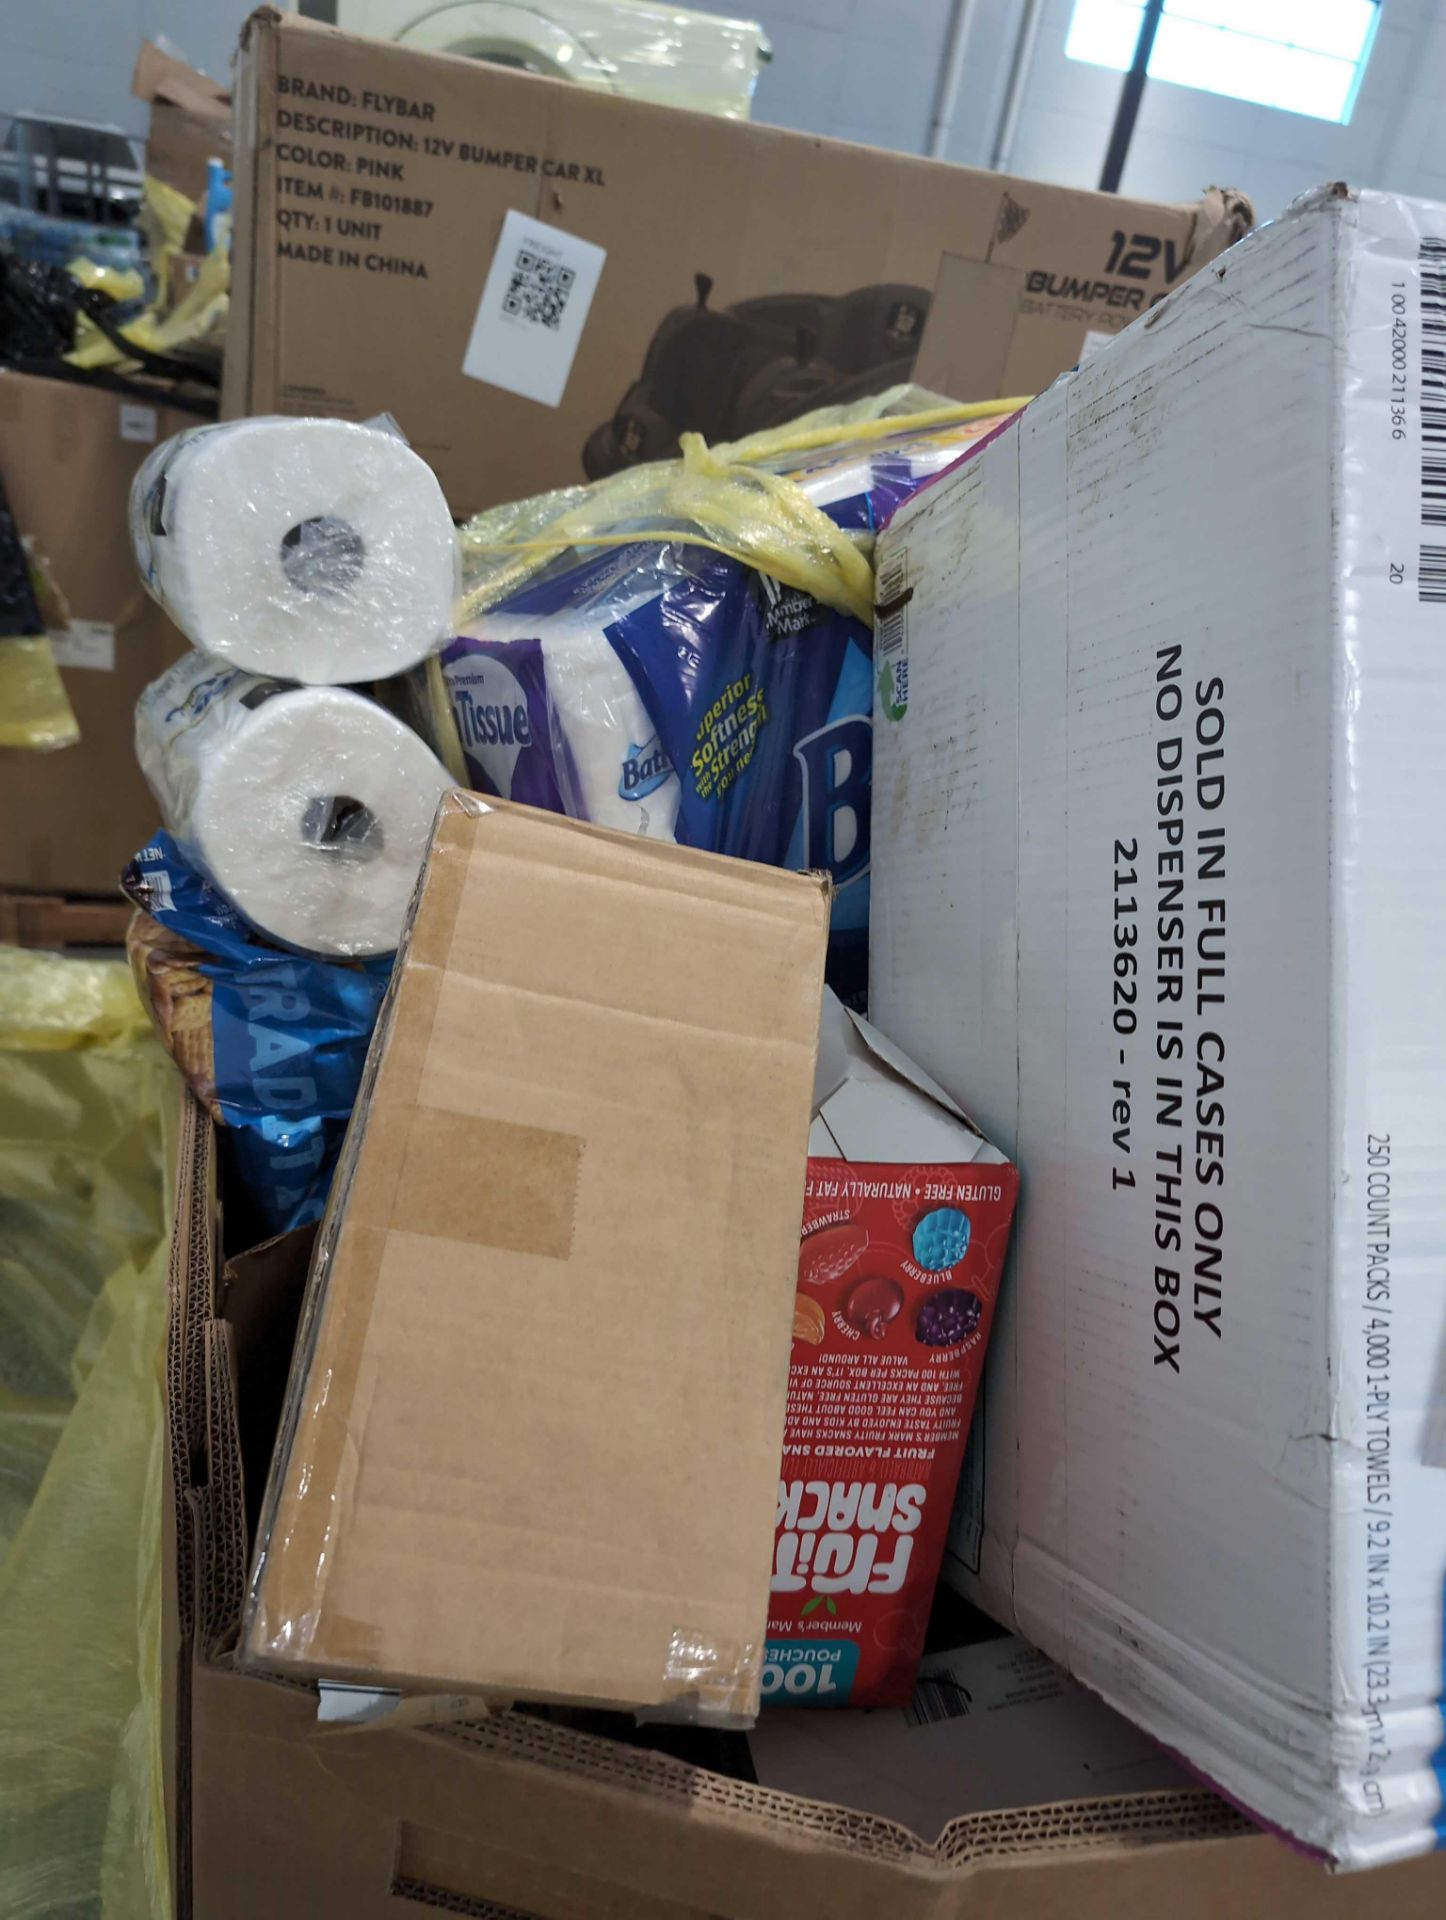 Big box store in a box: Toilet Paper, food containers, Towels, laundry detergent, nacho cheese sauce - Image 4 of 12